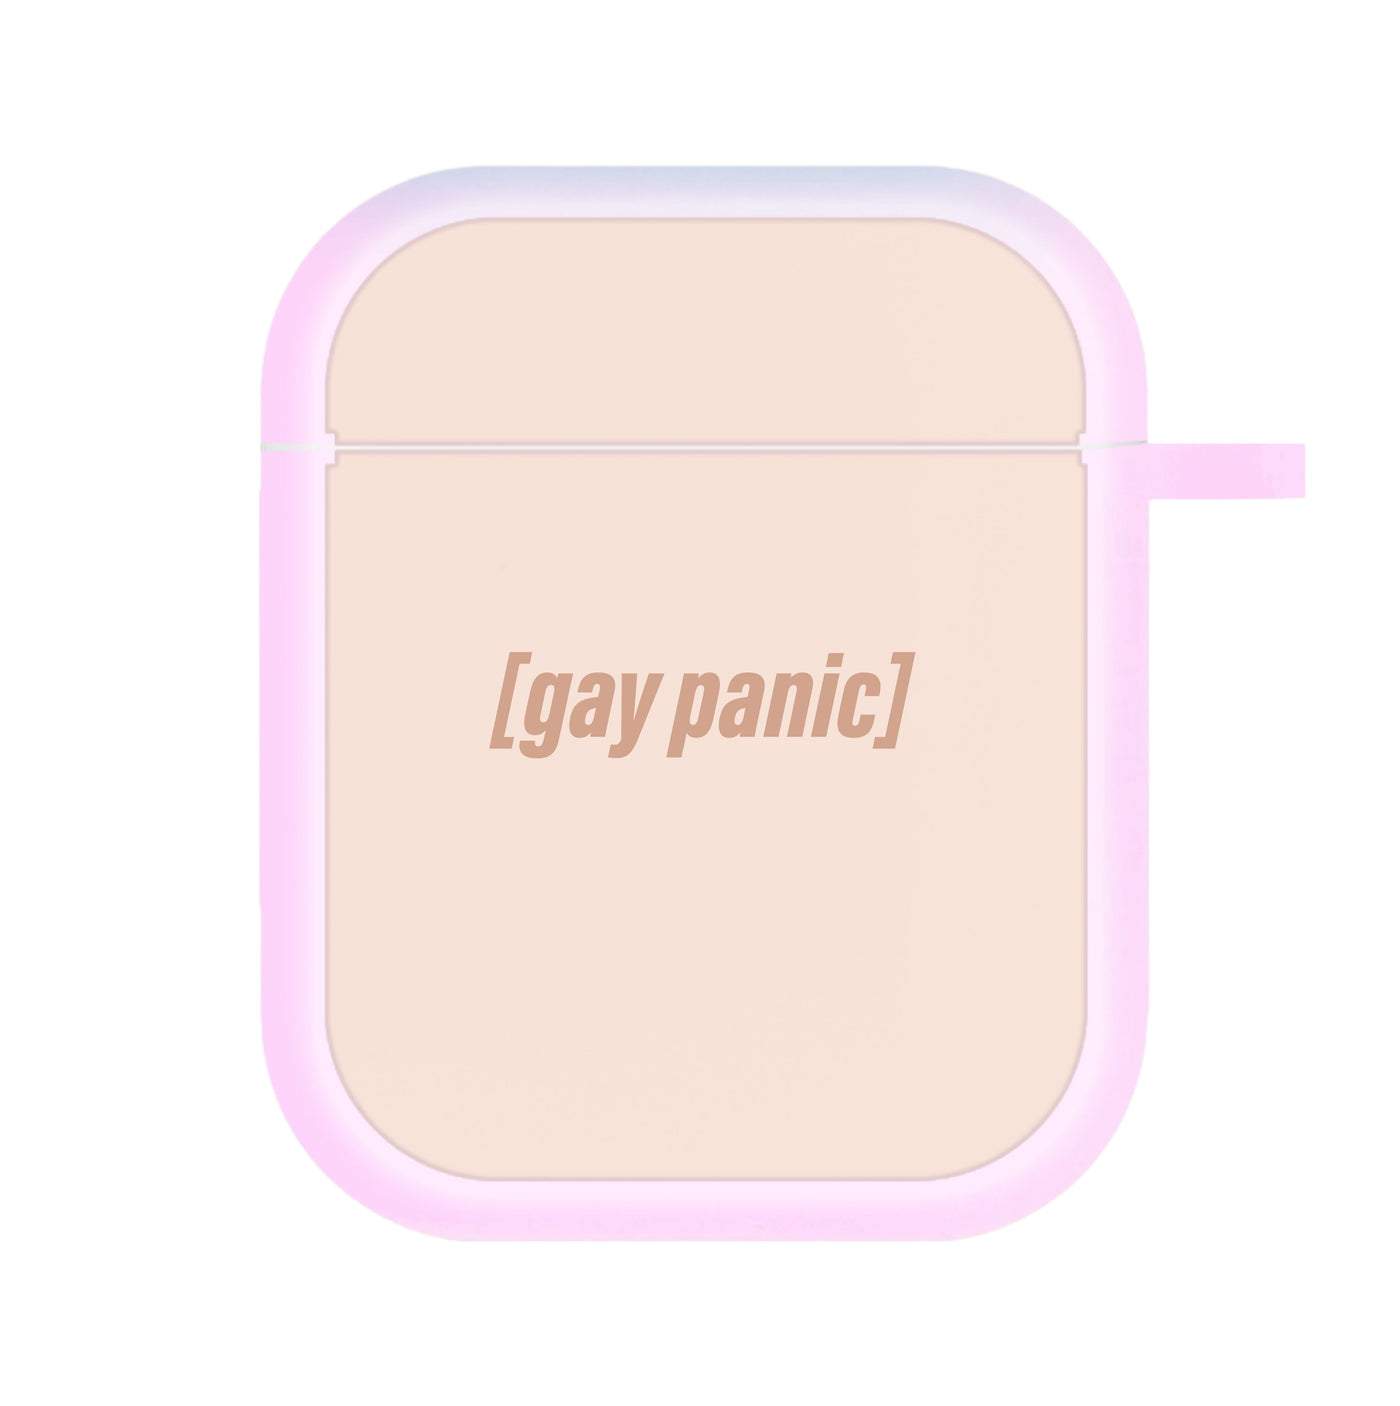 Gay Panic - Heartstopper AirPods Case